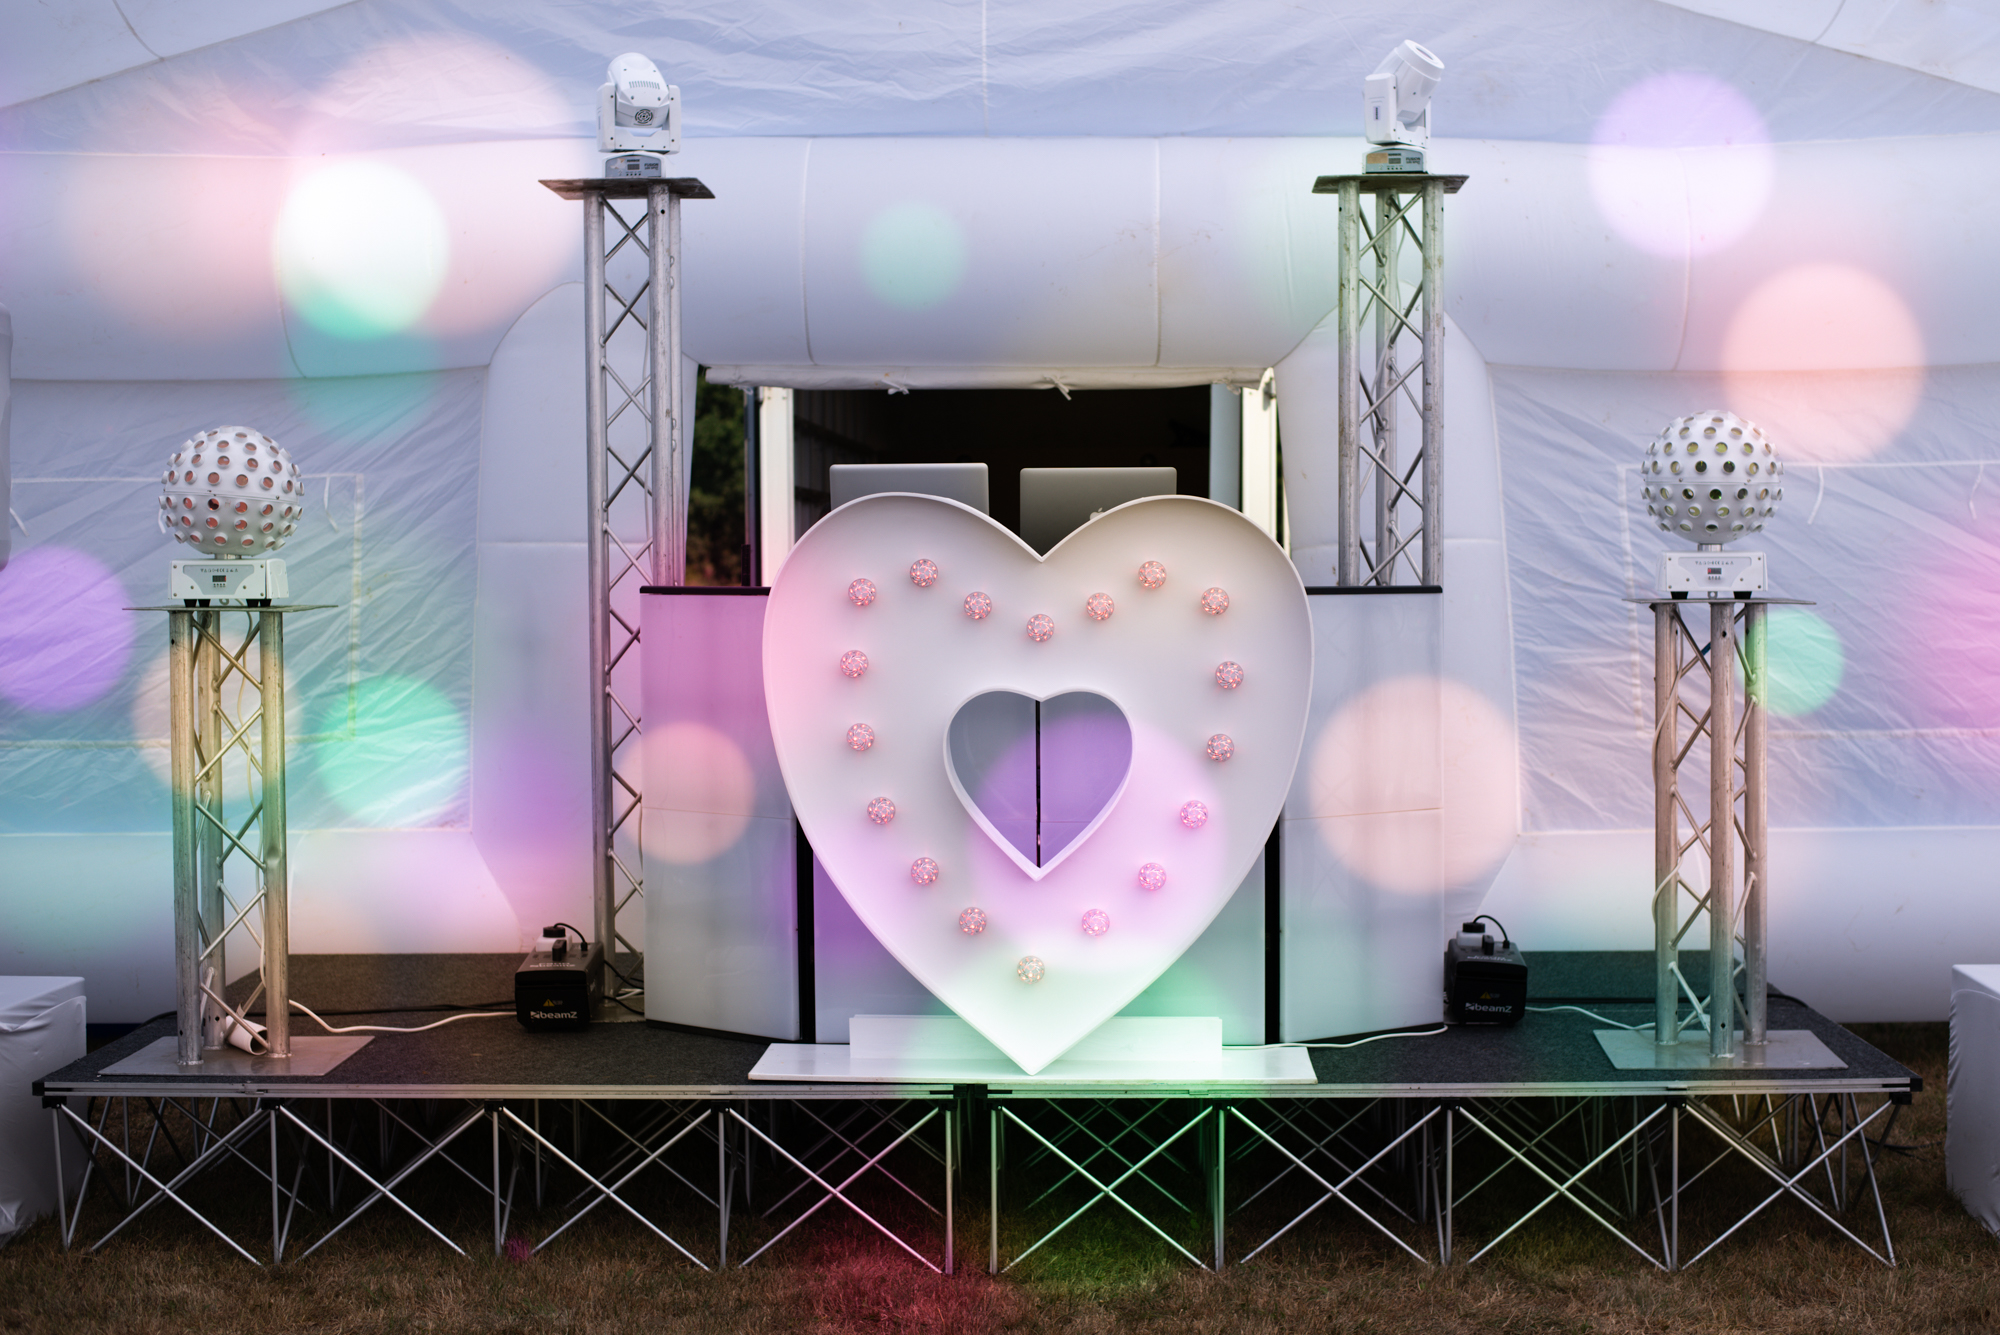 DJ for hire stage and party set up